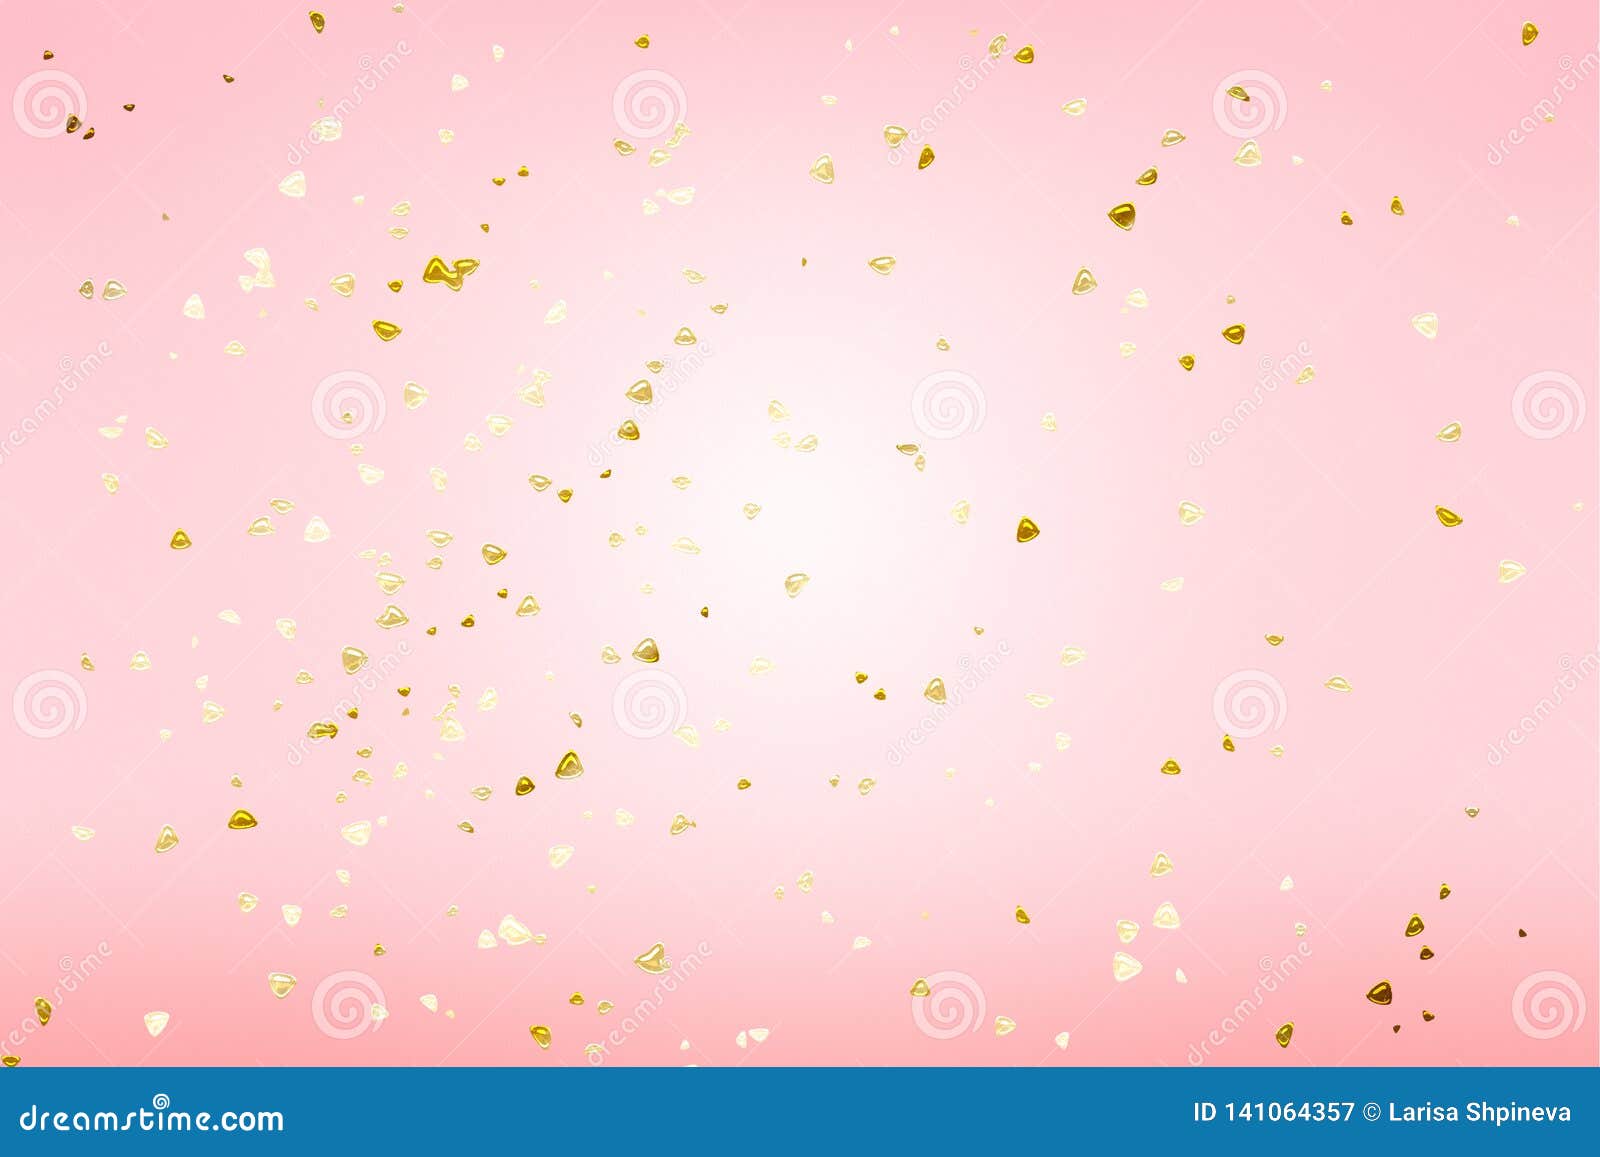 Golden Shiny Confetti on Pink Background in Modern Style. Sparkles Shape on  Romantic Wallpaper Decor Stock Image - Image of concept, flatlay: 141064357